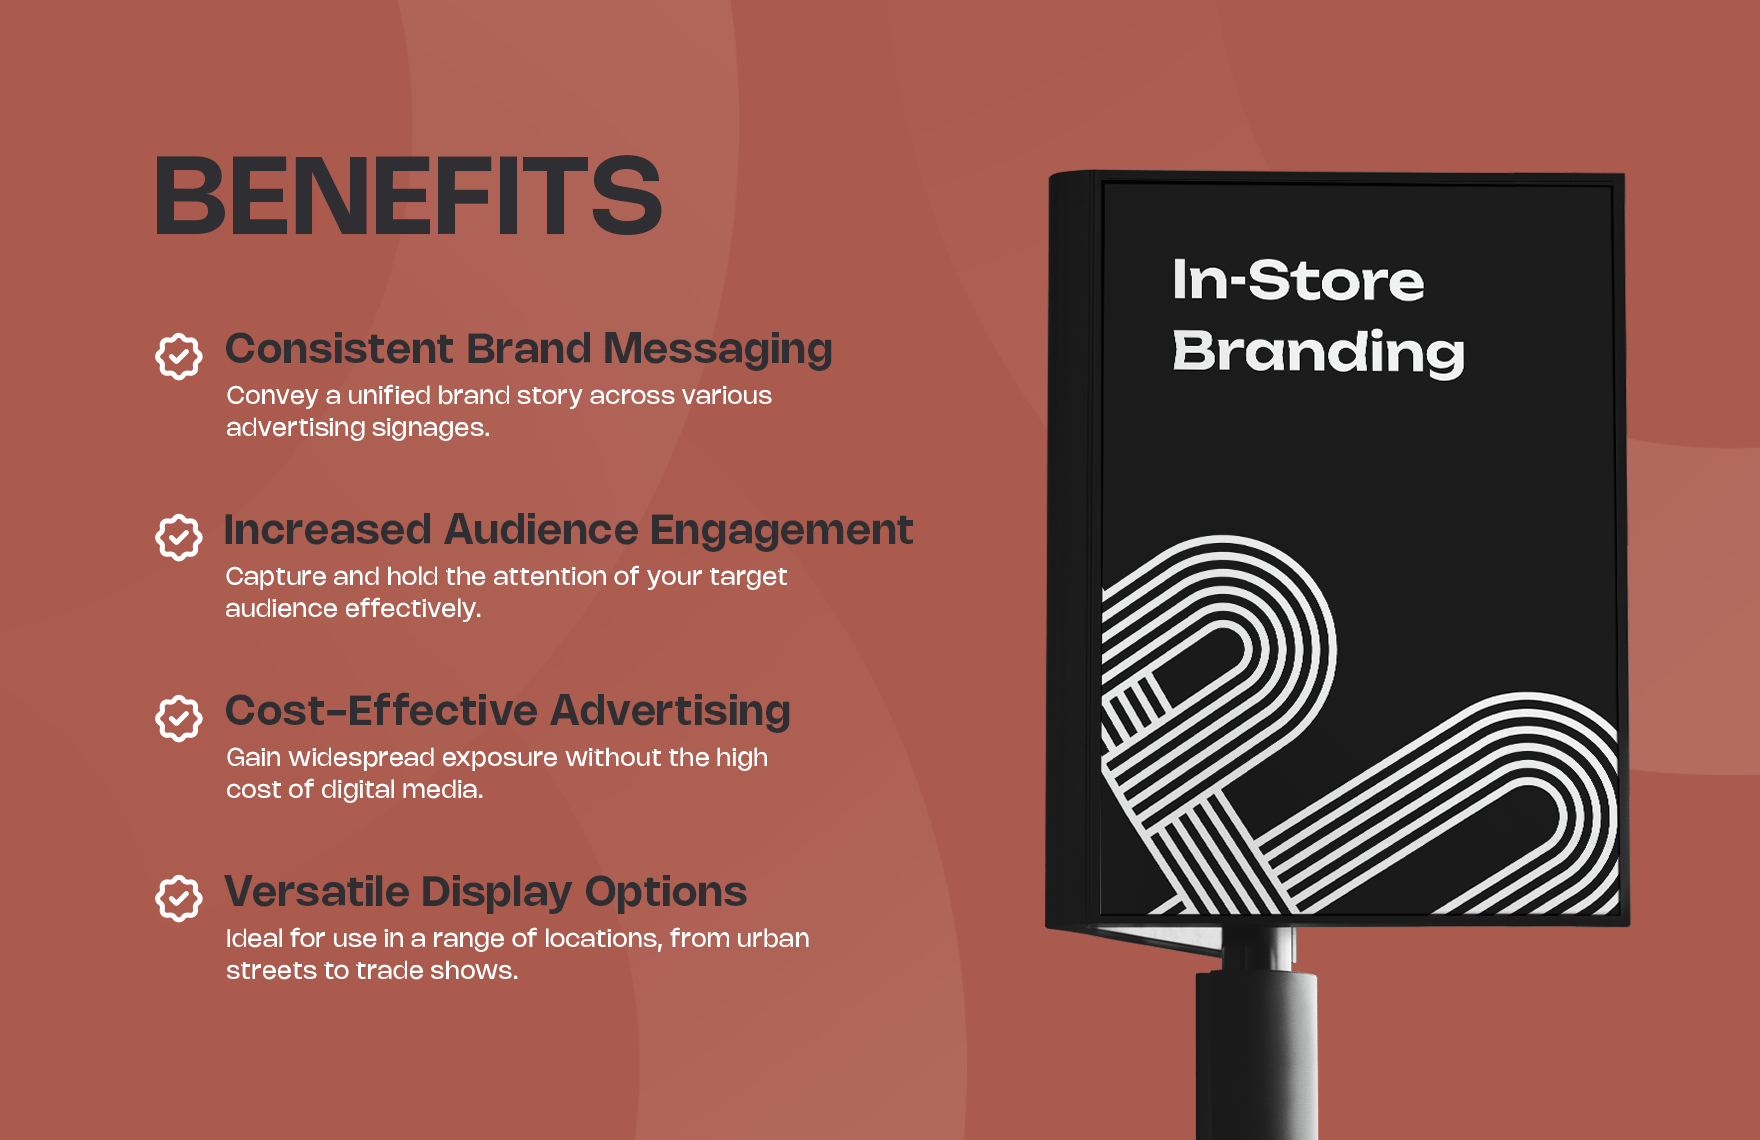 In-Store Branding Signage Template